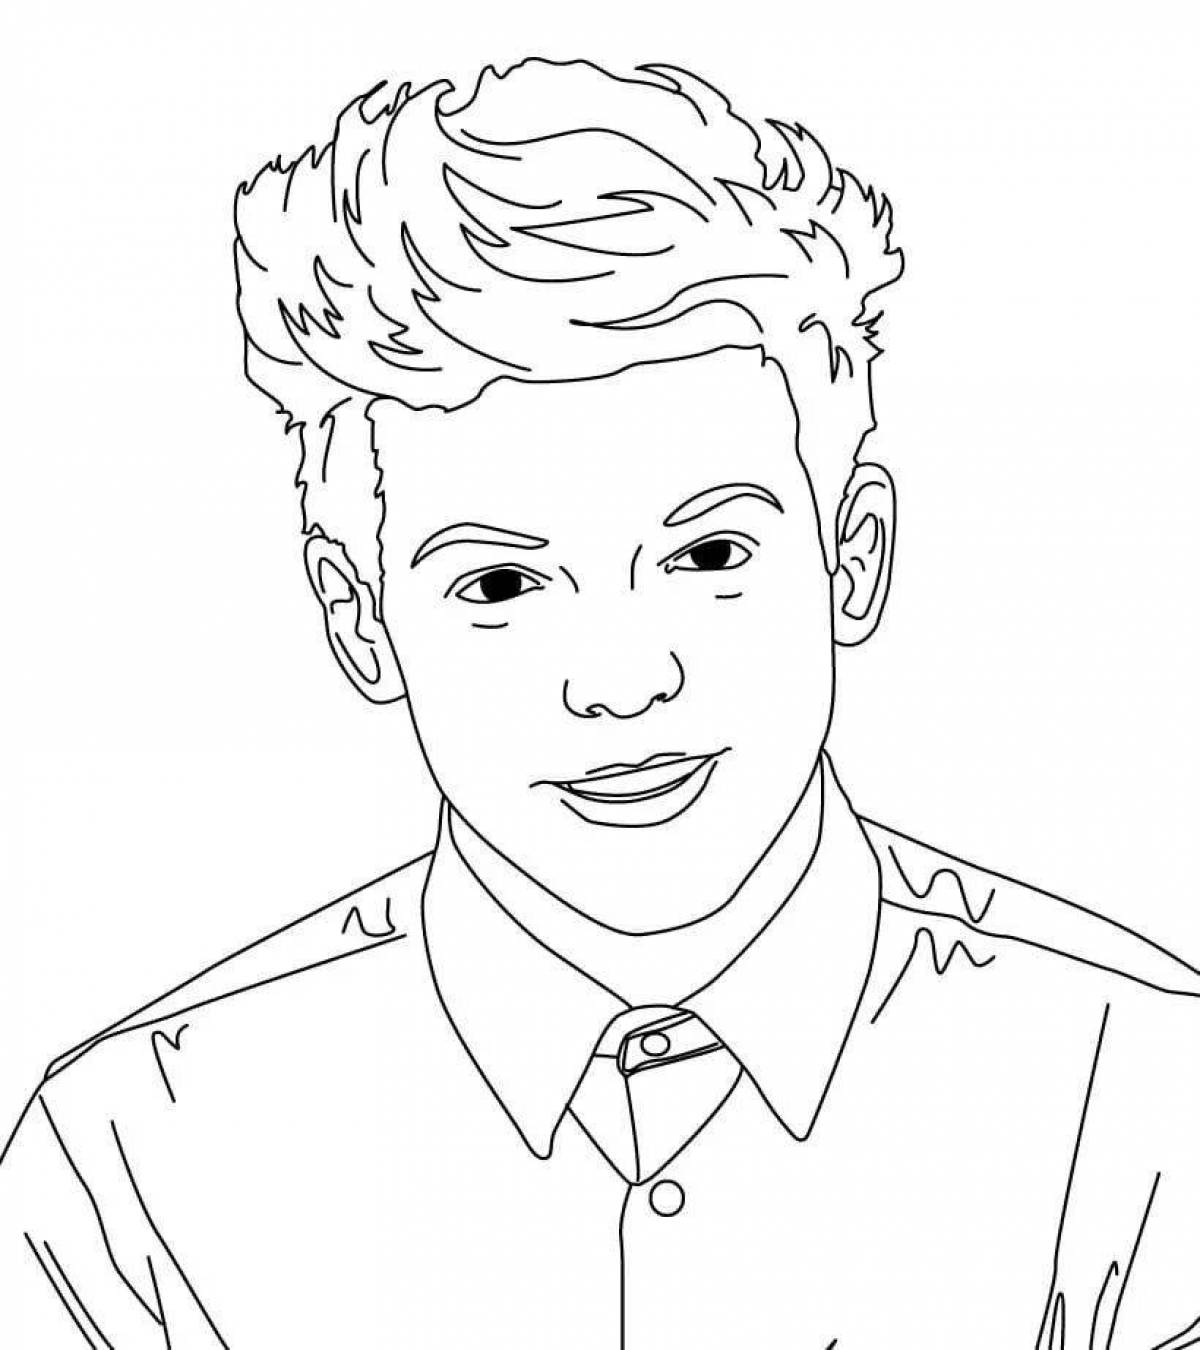 Saucy man face coloring page